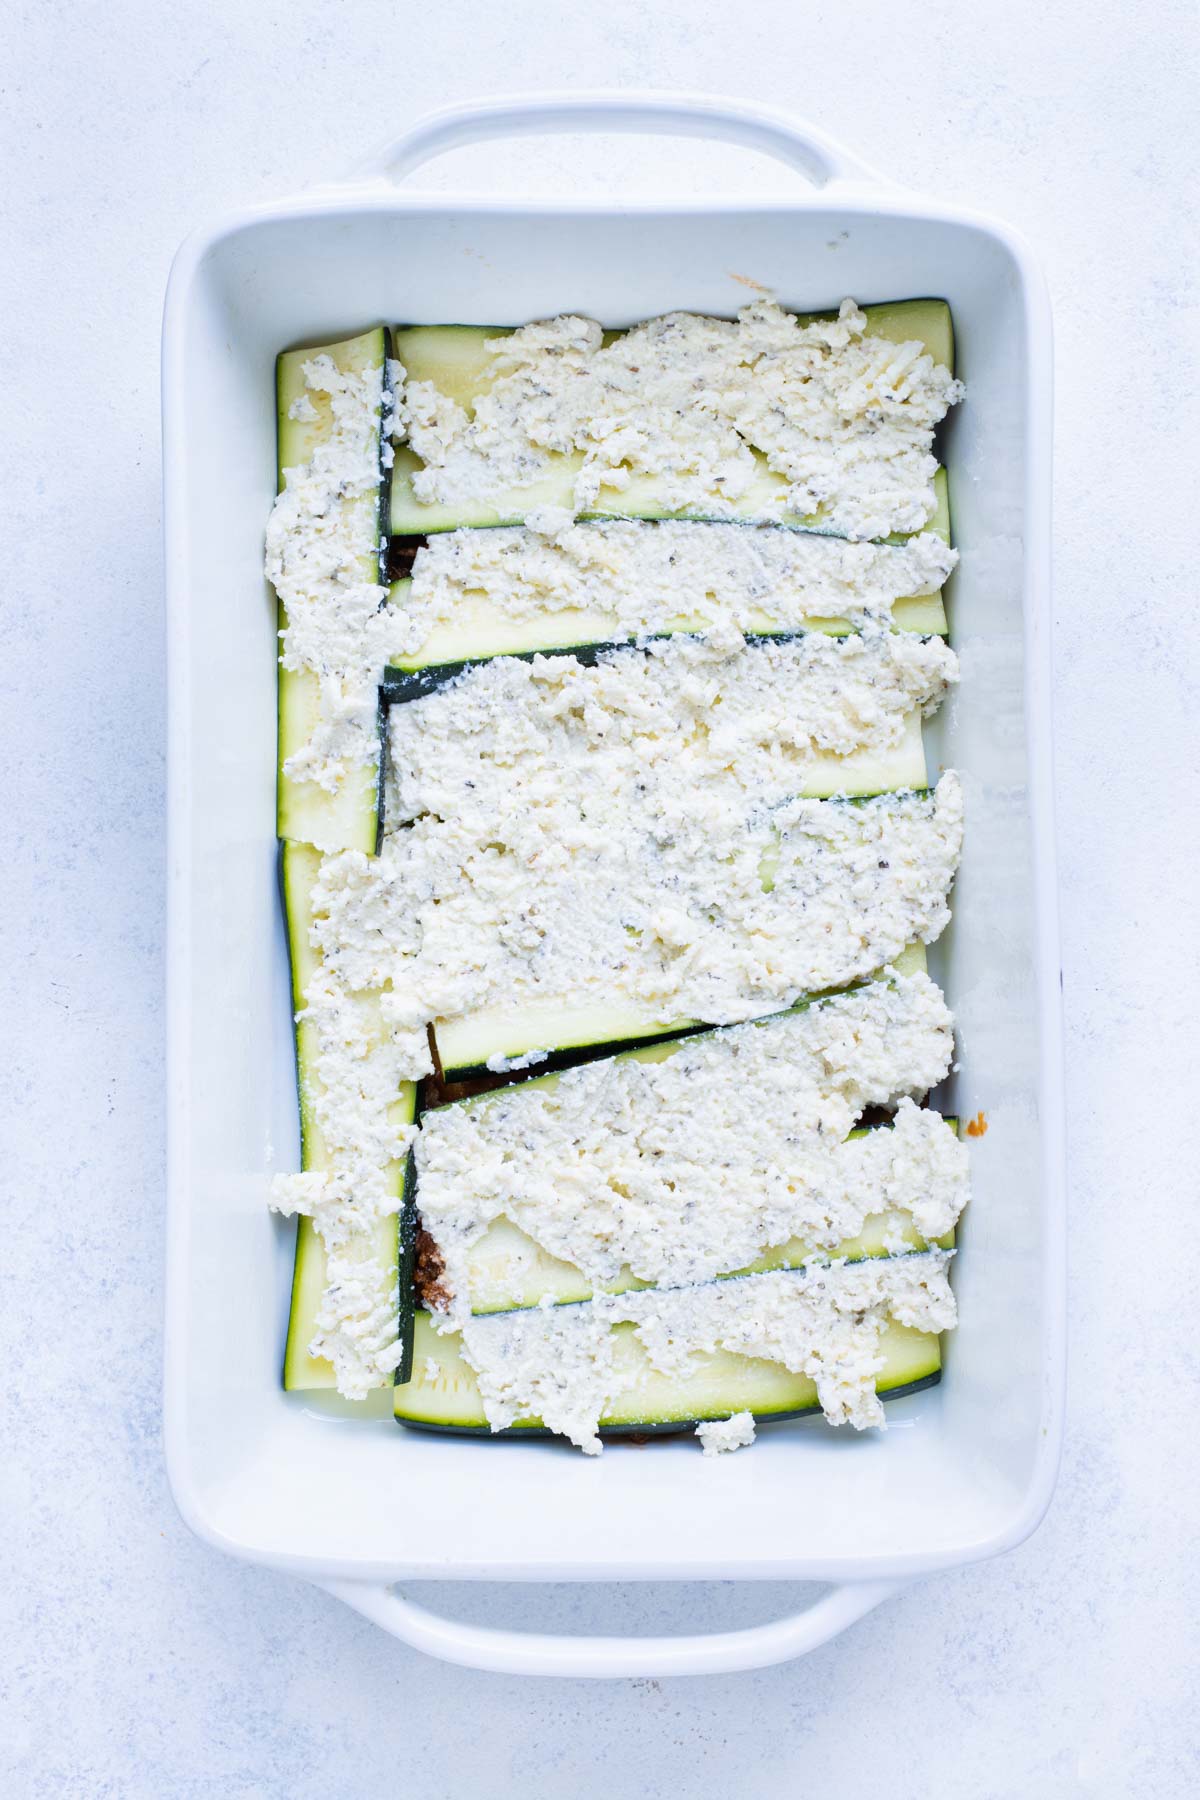 The healthy zucchini lasagna is formed by layering sauce, zucchini, and cheese mixture.